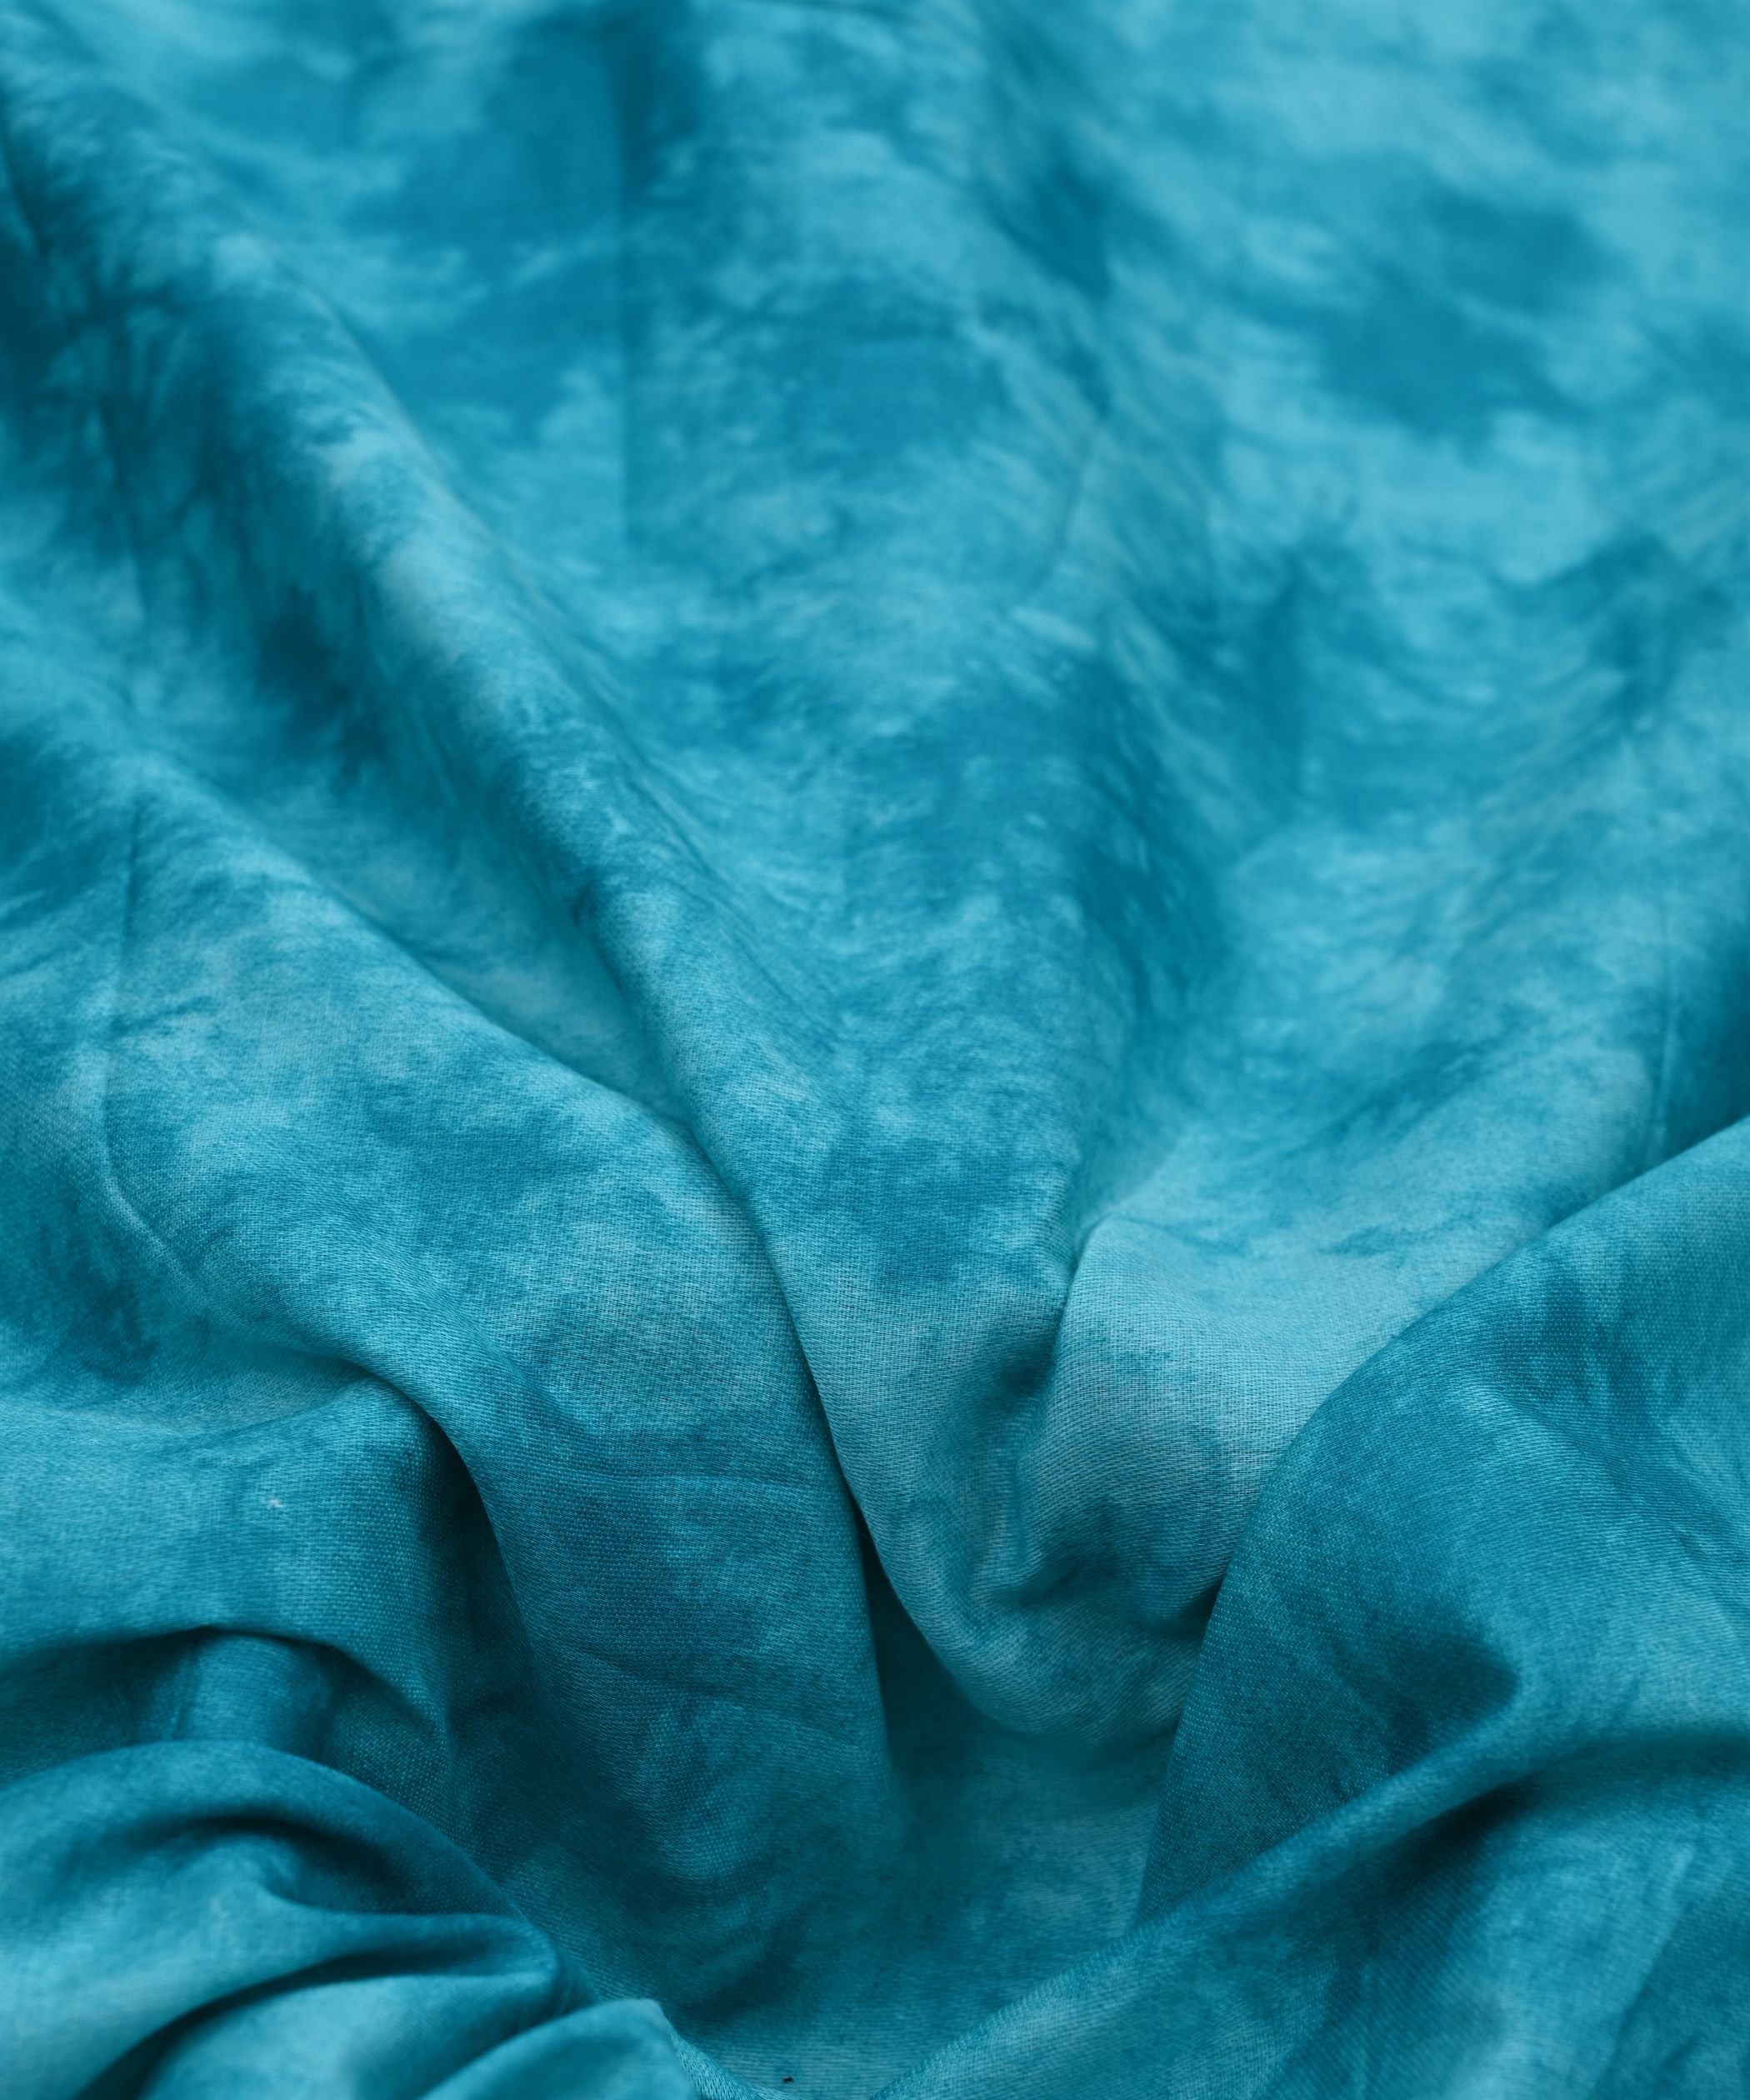 Blue Cotton Satin Fabric with Tie and Dye